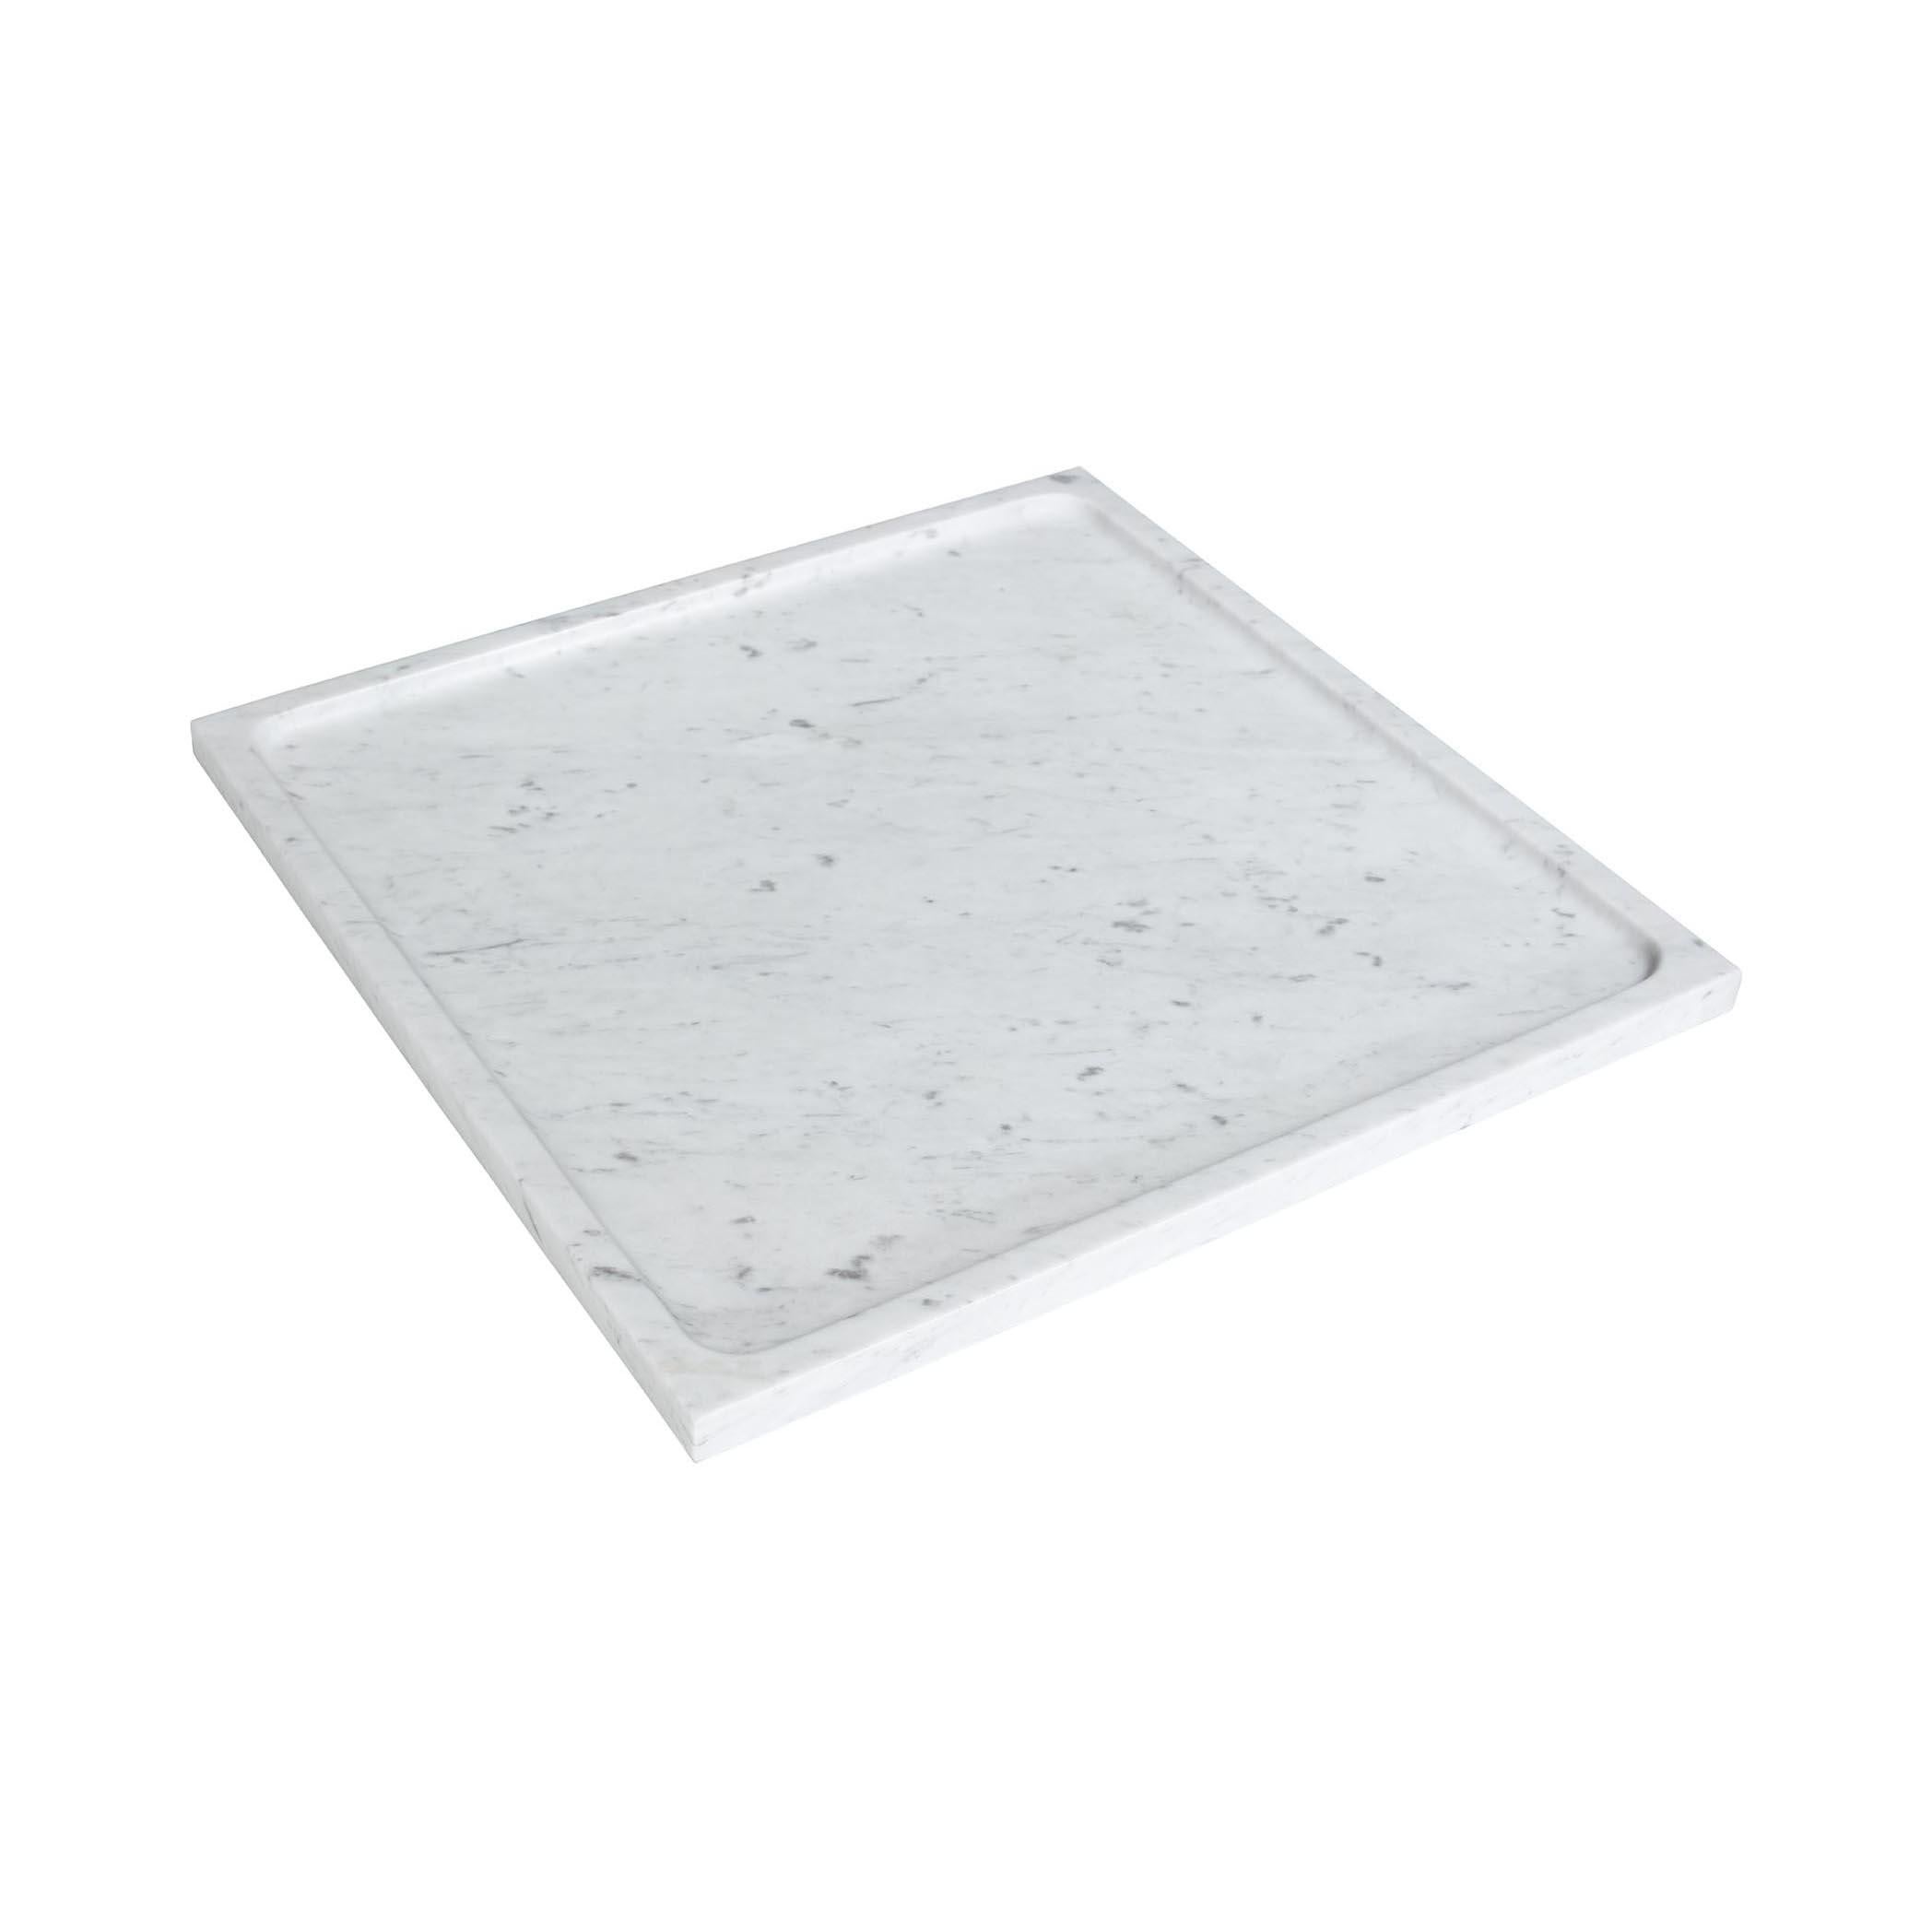 With Hatt trays possibilities are immense when you use it to kick start the party by serving your tasty finger food appetizers in your house. Available in different types of marble such as: Calacata, Estremoz, Marquina, Gray Kendzo and Portoro.
A